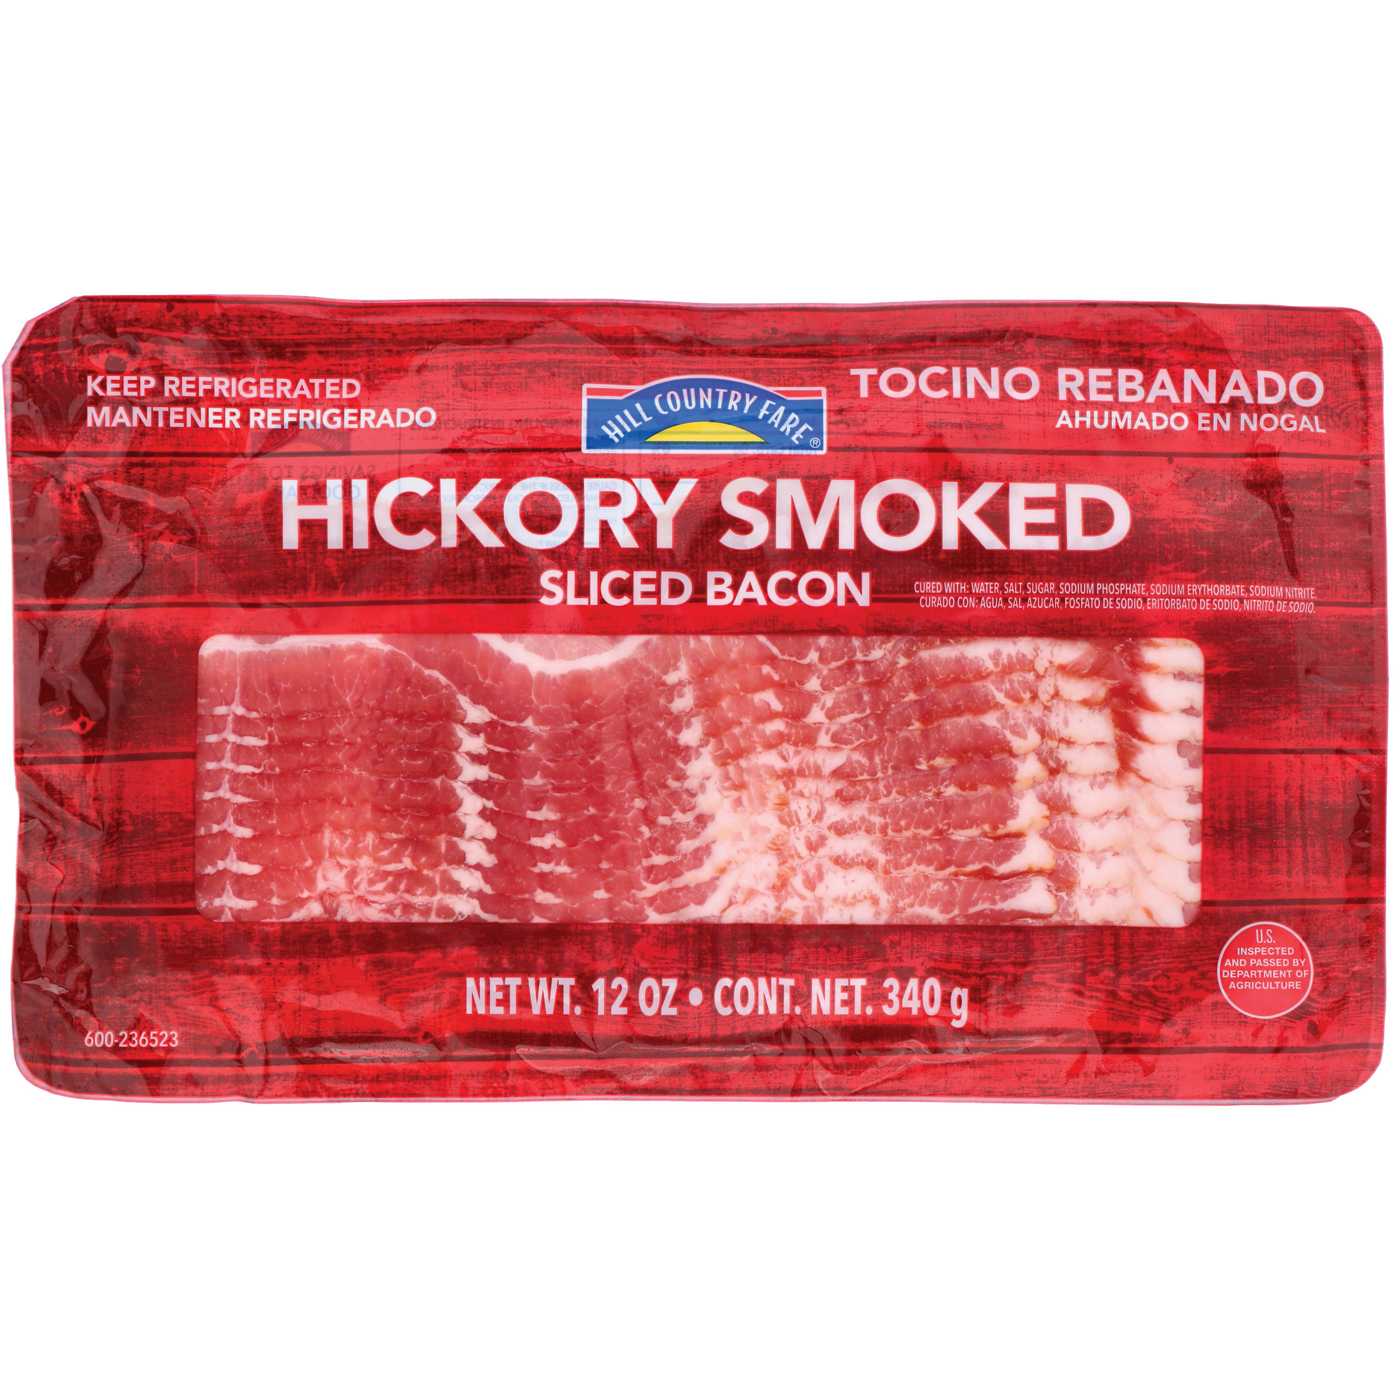 Hill Country Fare Hickory Smoked Sliced Bacon; image 2 of 2